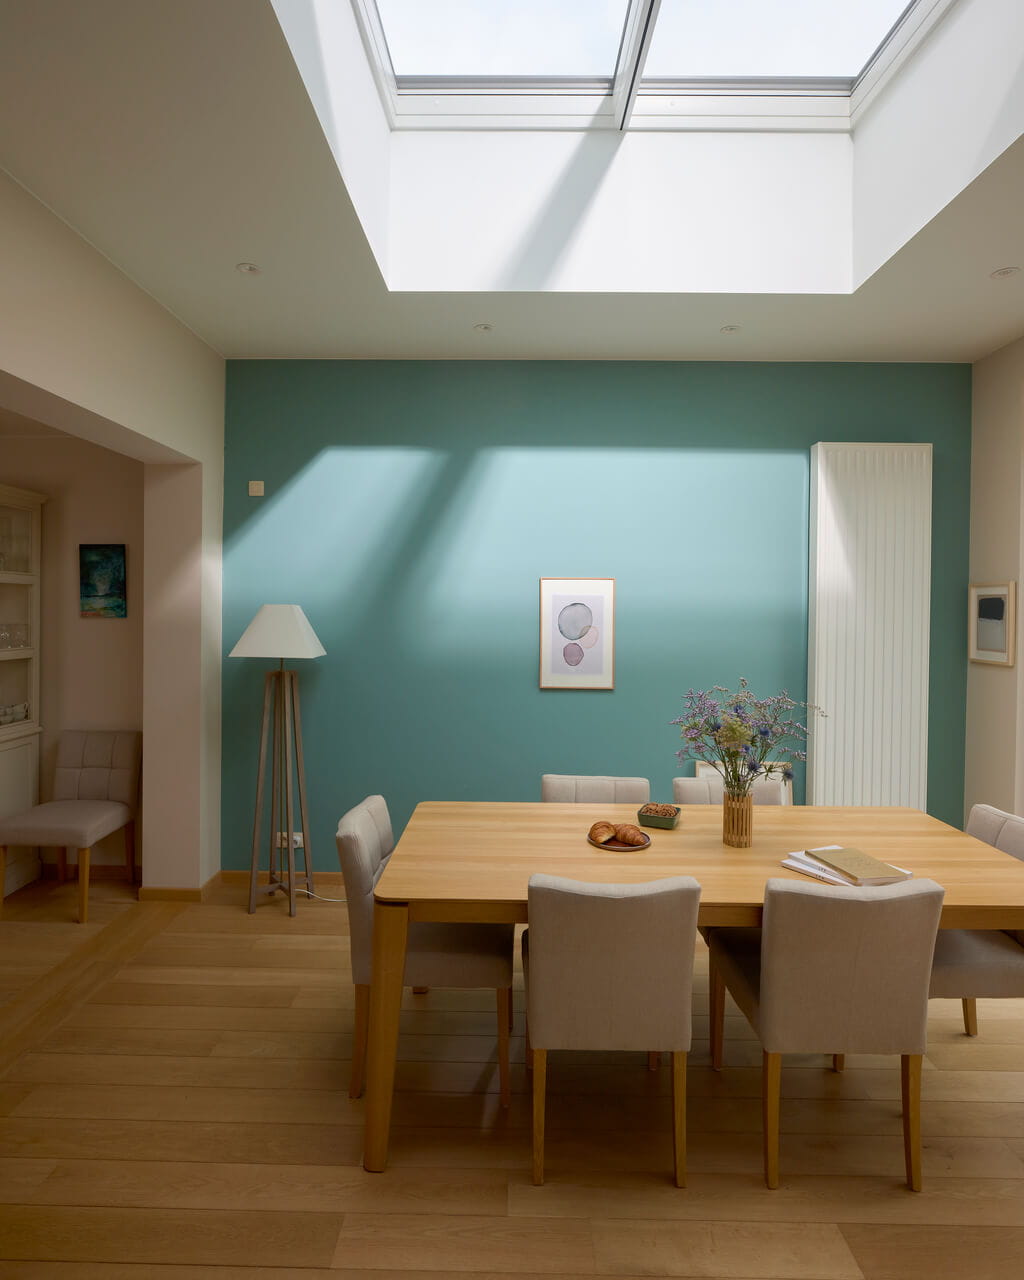 Dining room area with a sun coming in through the flat roof window.